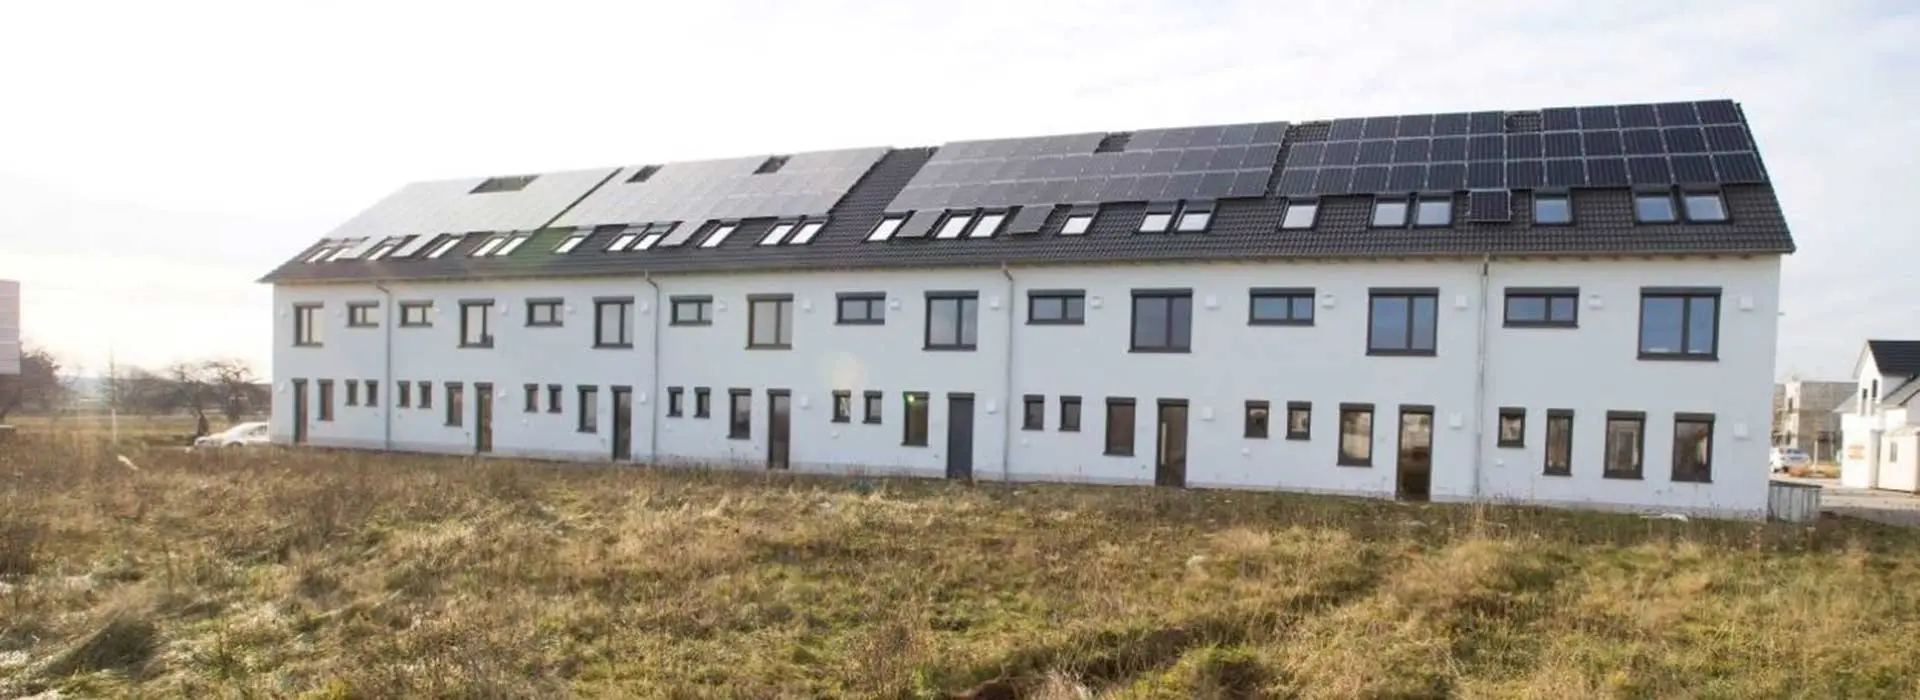 A long row house with a meadow in the foreground and photovoltaics on the roof stands in a housing estate.